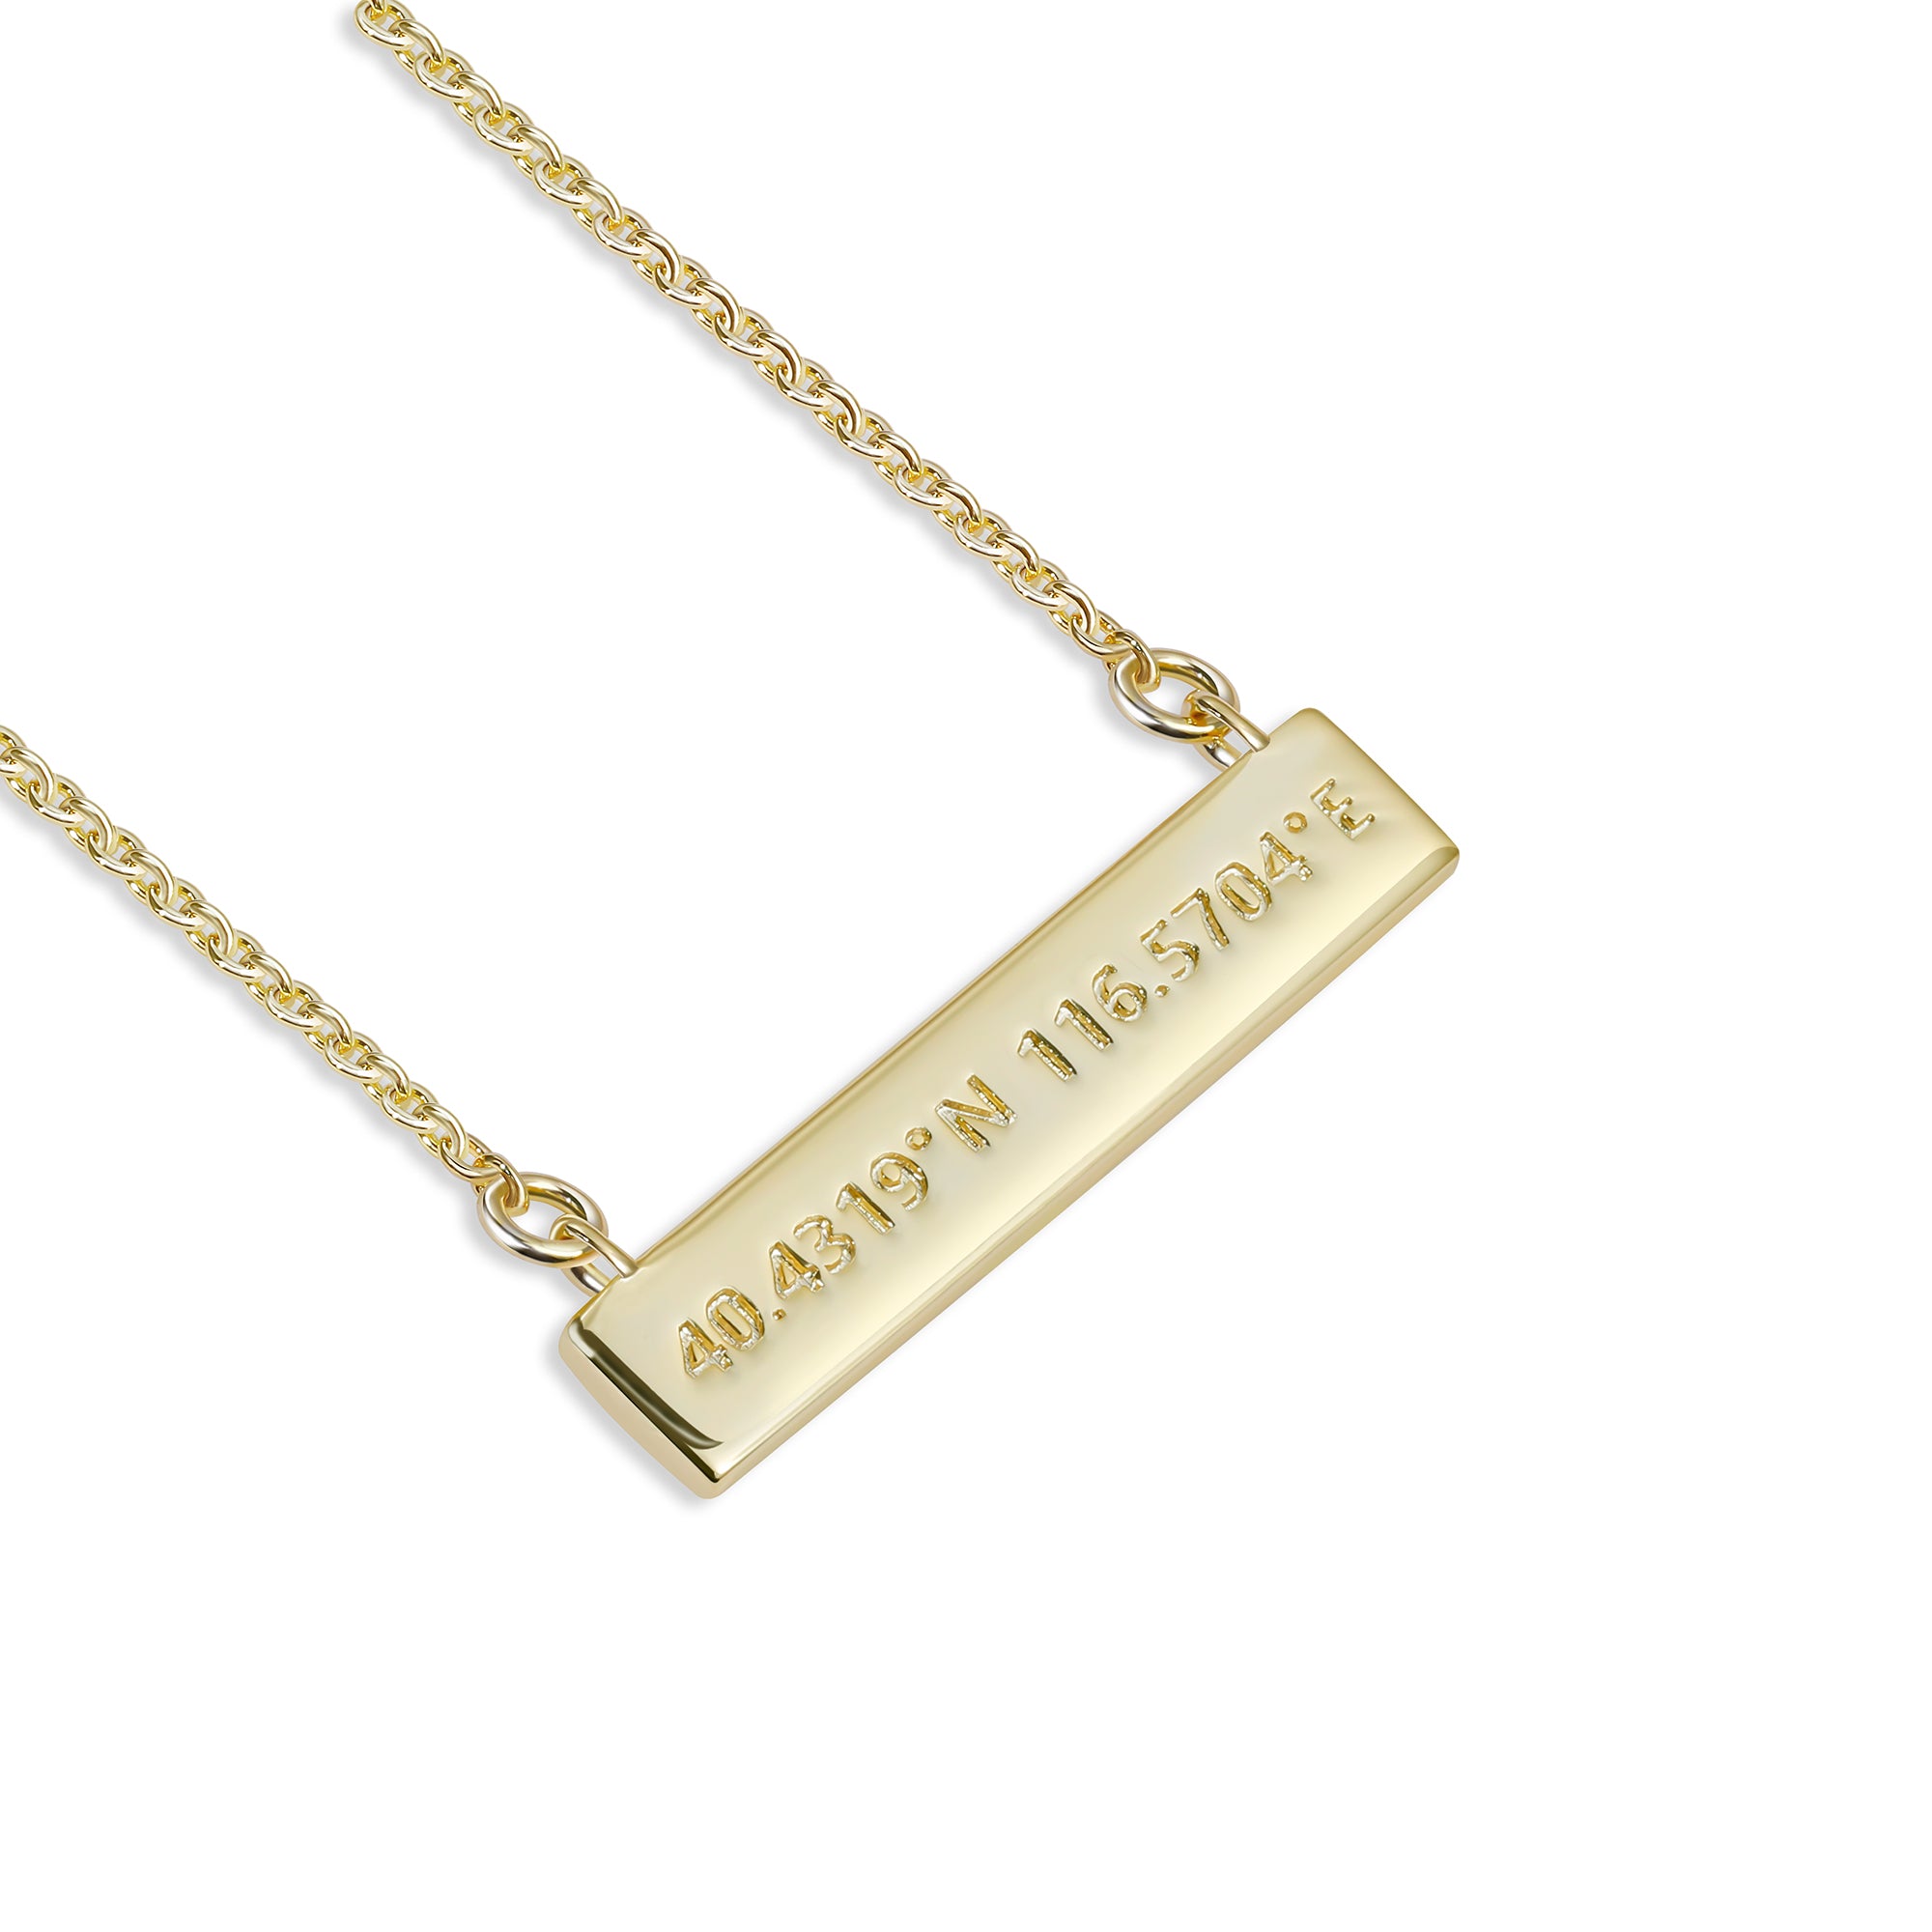 14K gold necklace for women, horizontal bar necklace, personalized necklace